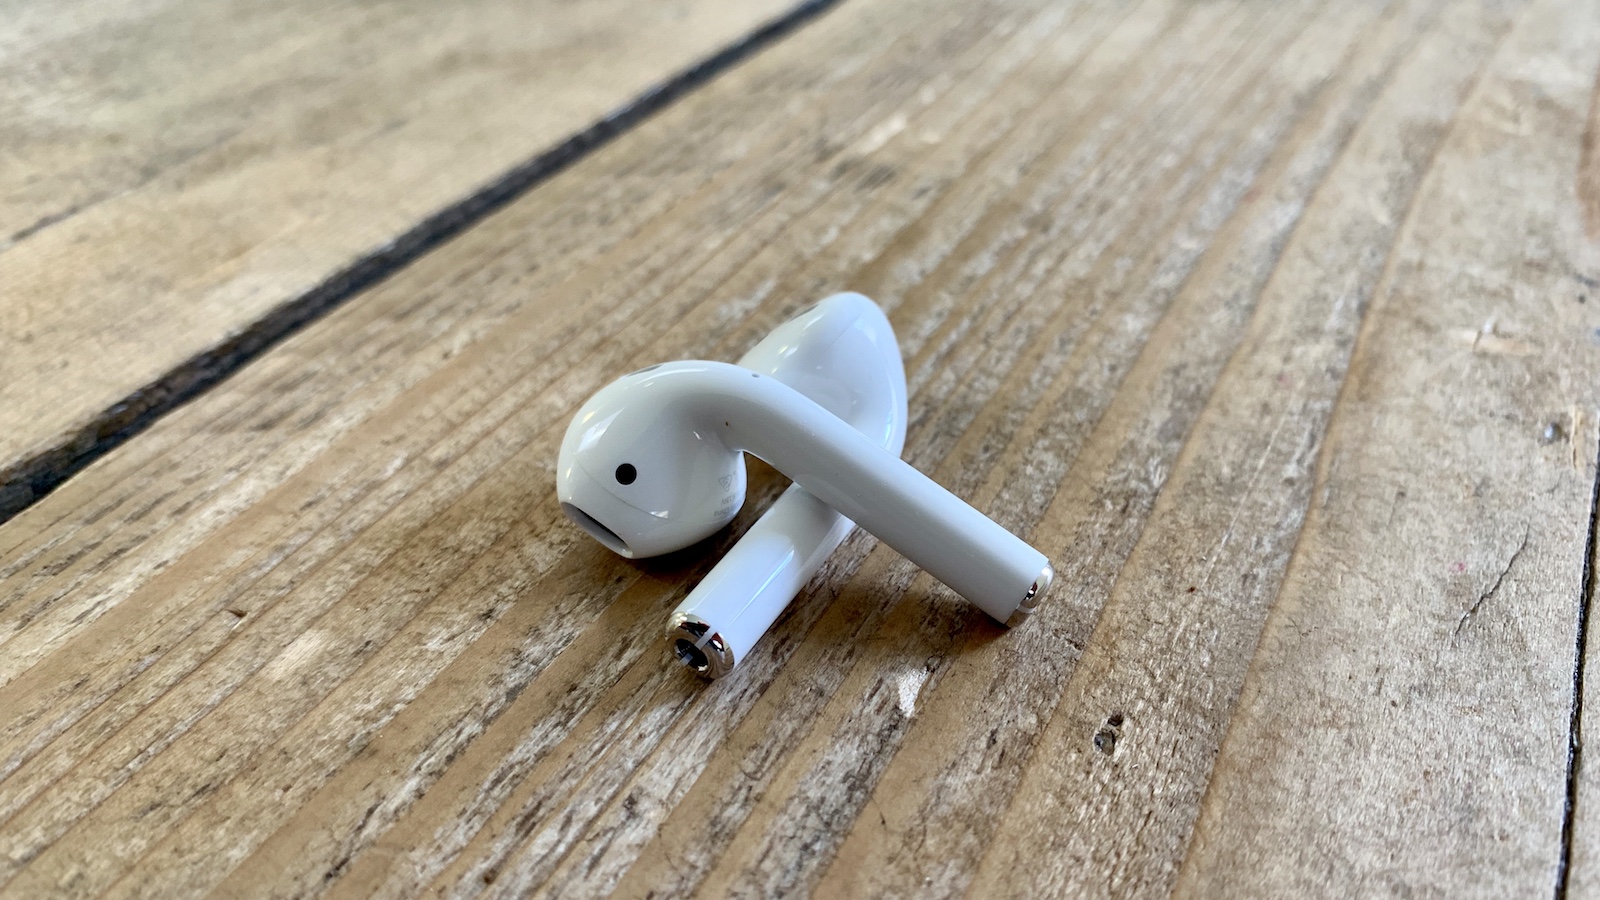 Apple AirPods Pro 3 release date predictions, price, specs, and